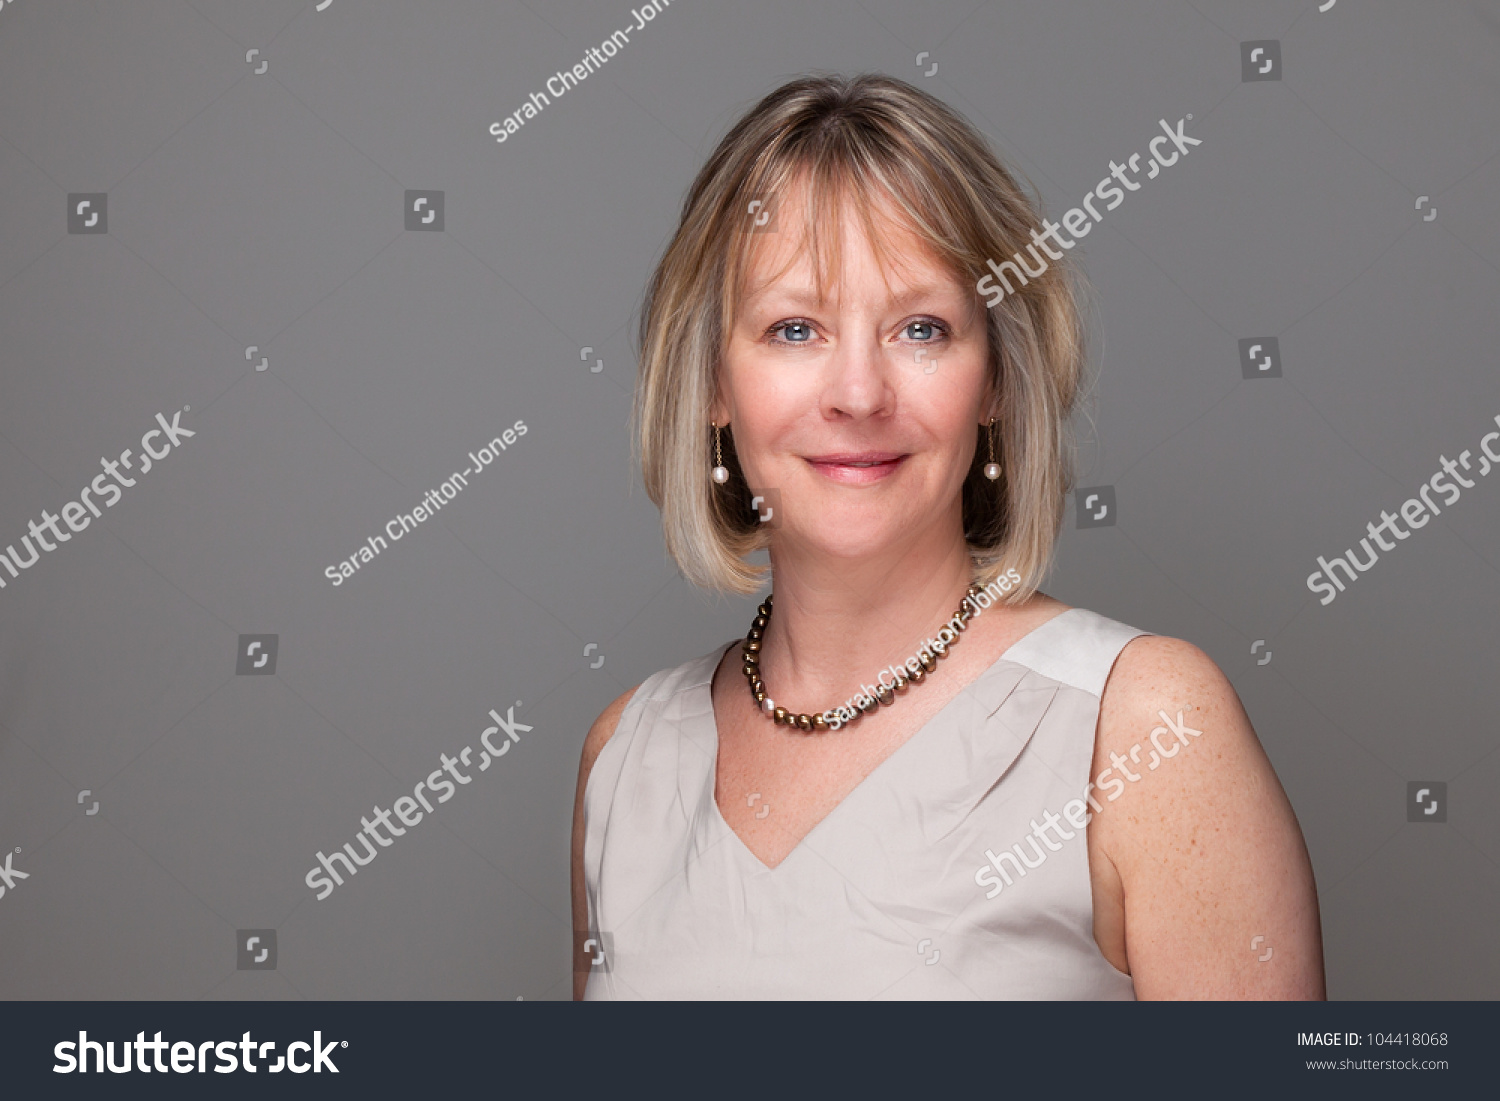 Head Shot Portrait of Attractive Smiling Elegant Woman on Grey Background #104418068